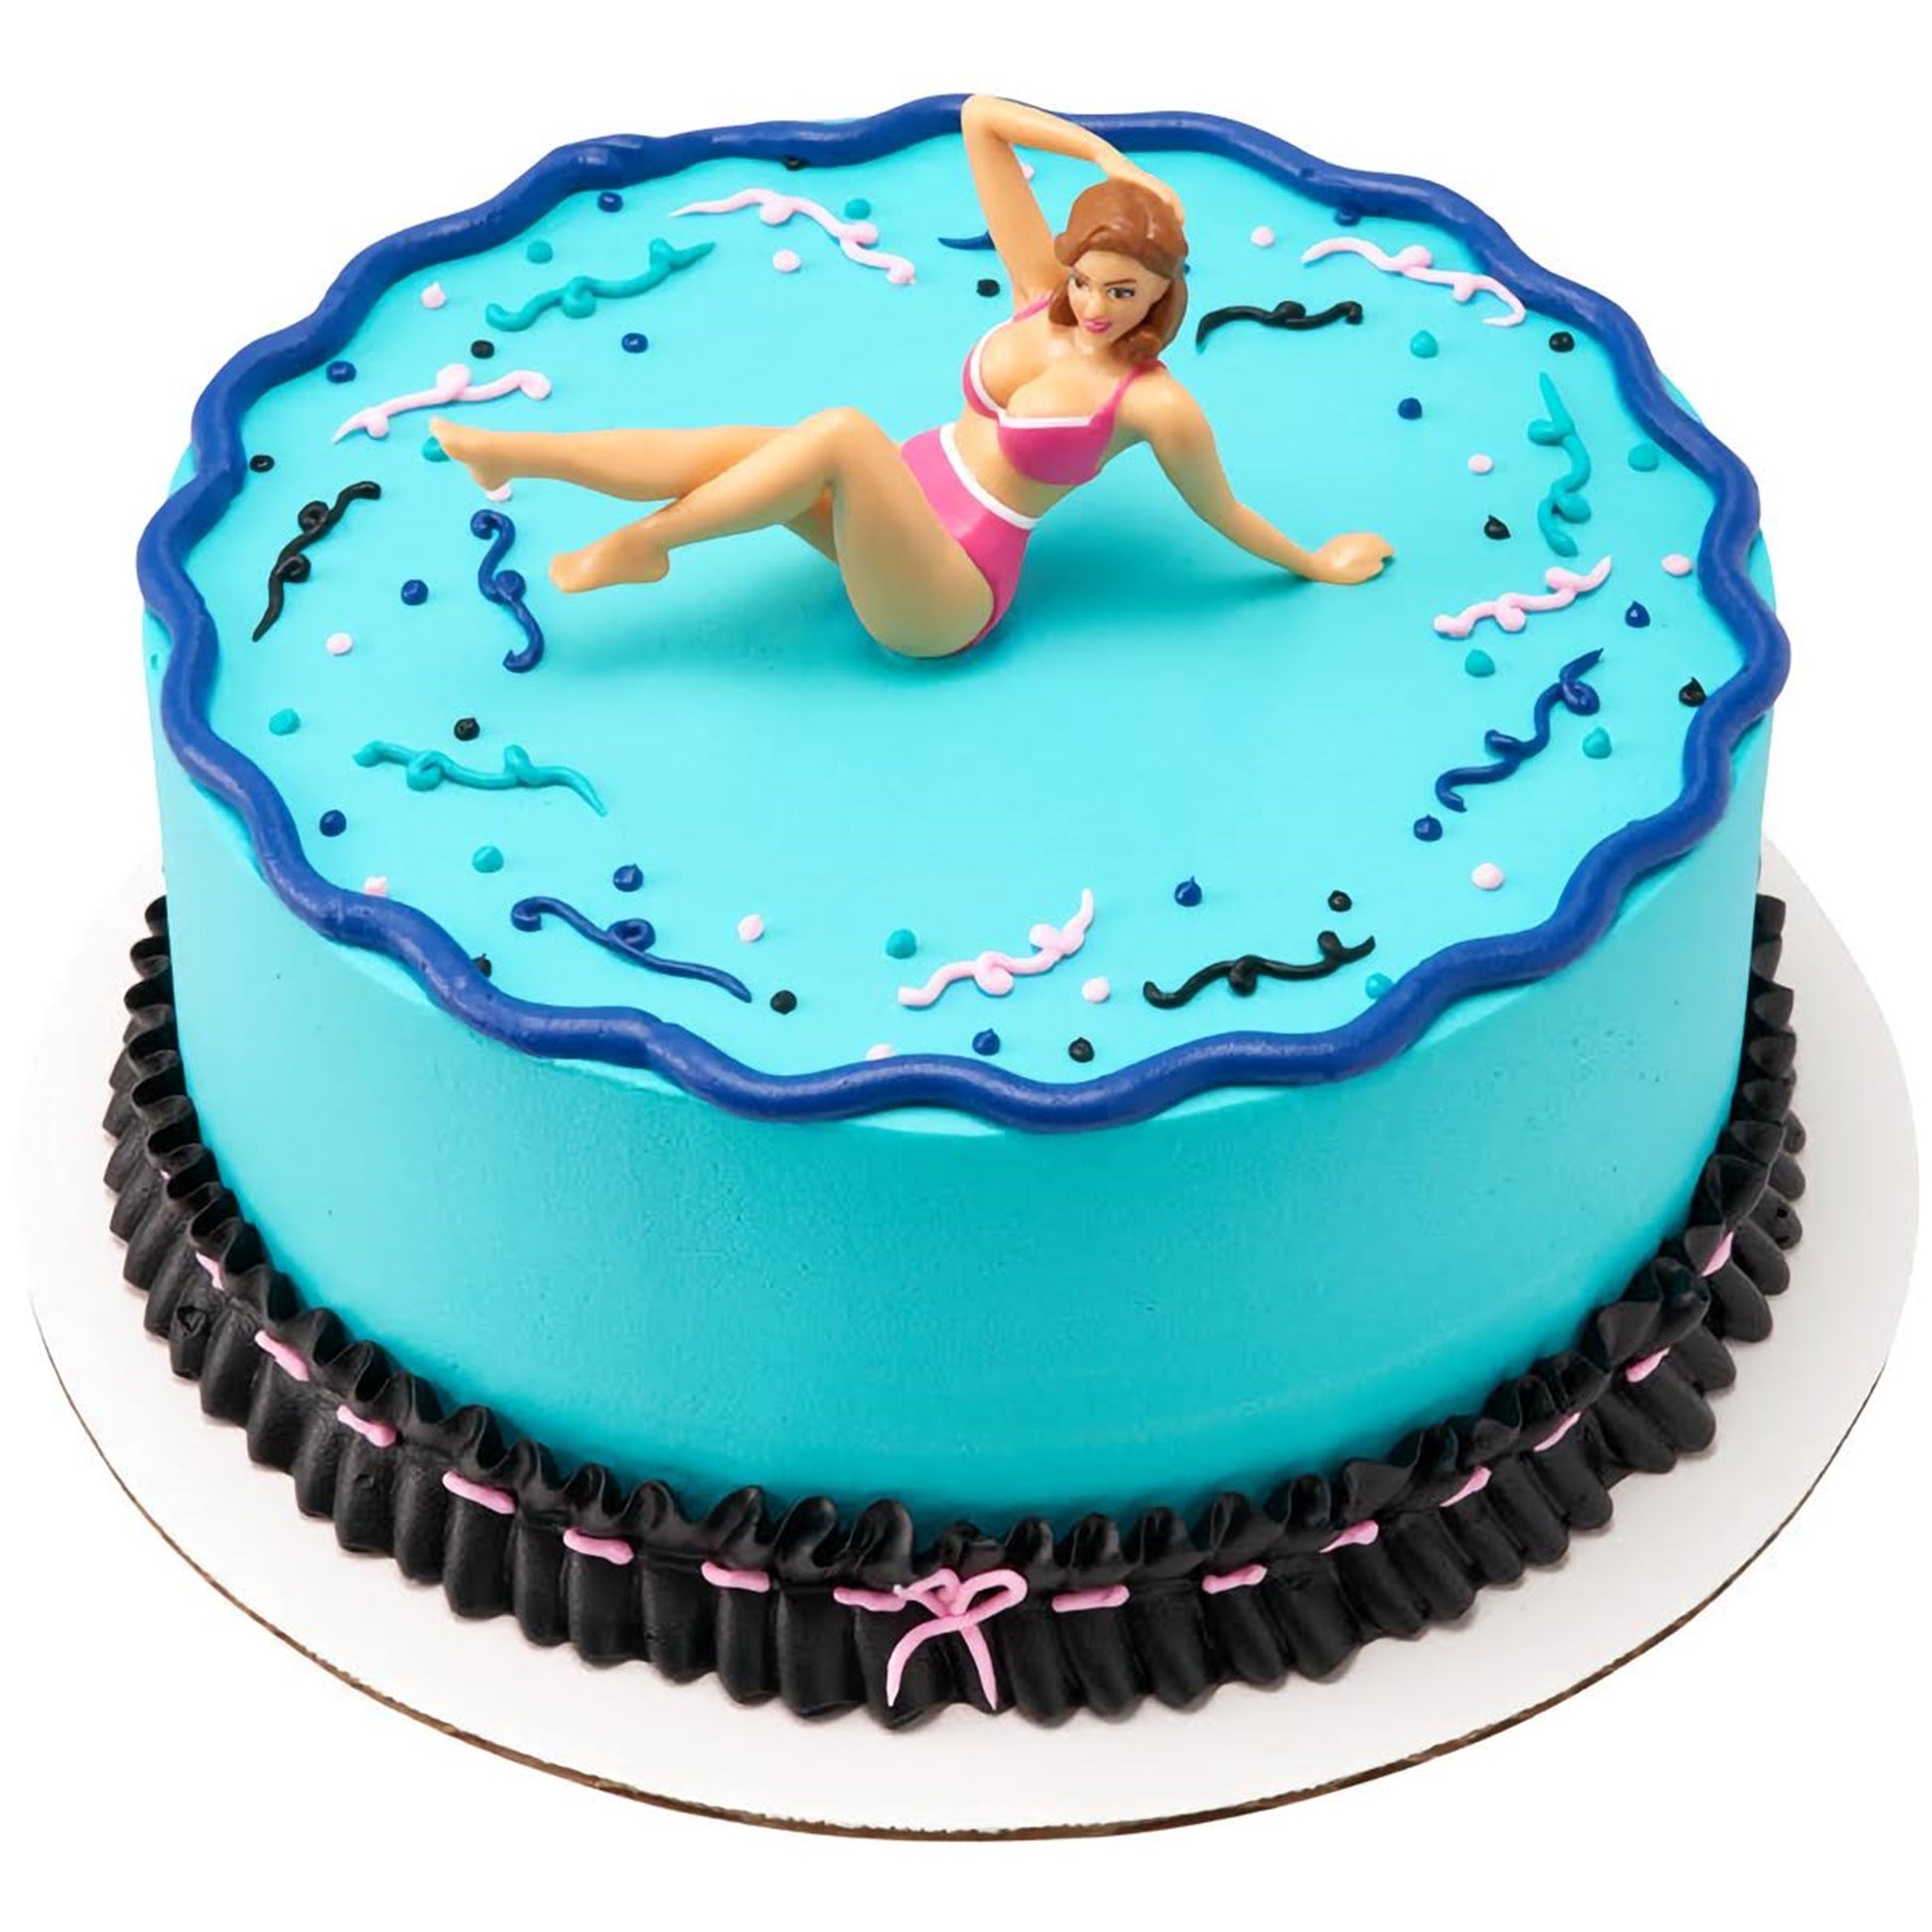 A vibrant blue cake topped with a bikini-clad woman topper, featuring playful black and pink squiggle decorations and a wavy border. This lively and eye-catching cake from Lynn's Cake, Candy, and Chocolate Supplies is sure to be the talk of any adult party or summer bash.